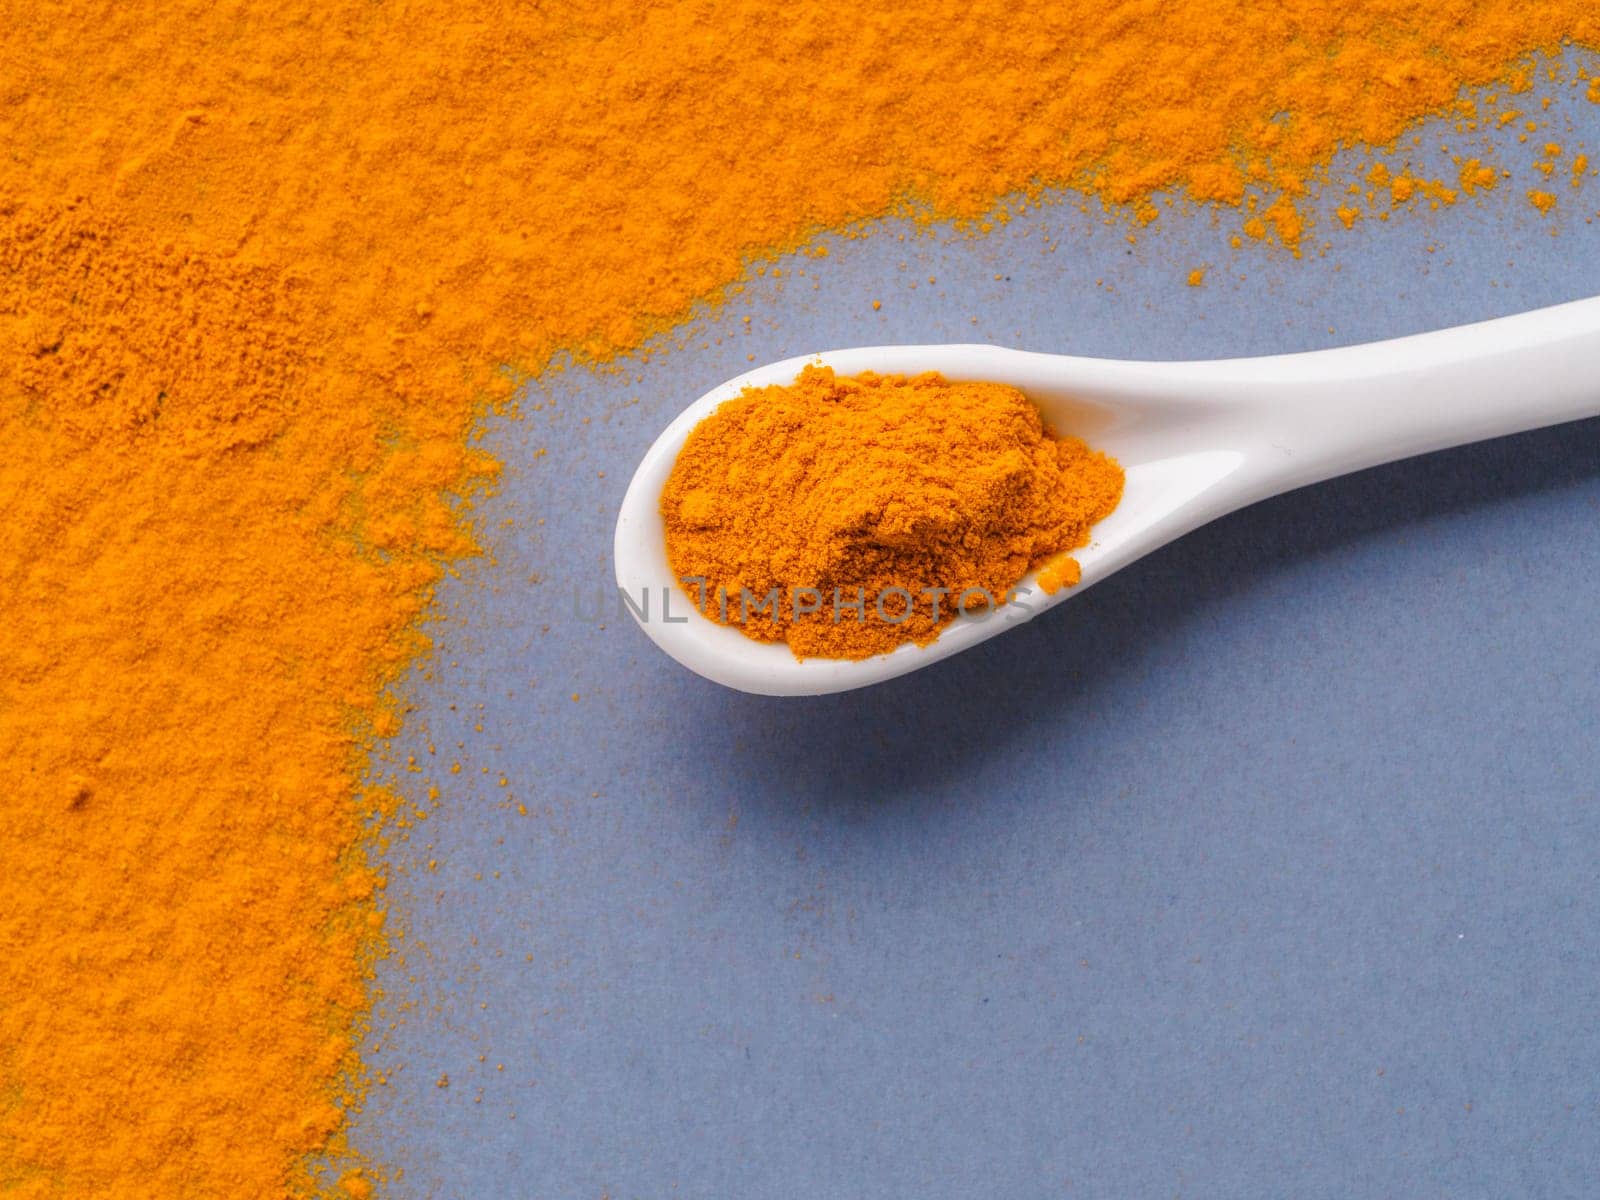 Turmeric Powder or Curcuma longa and white spoon with turmeric powder on gray background. Top view. Copy space for text.